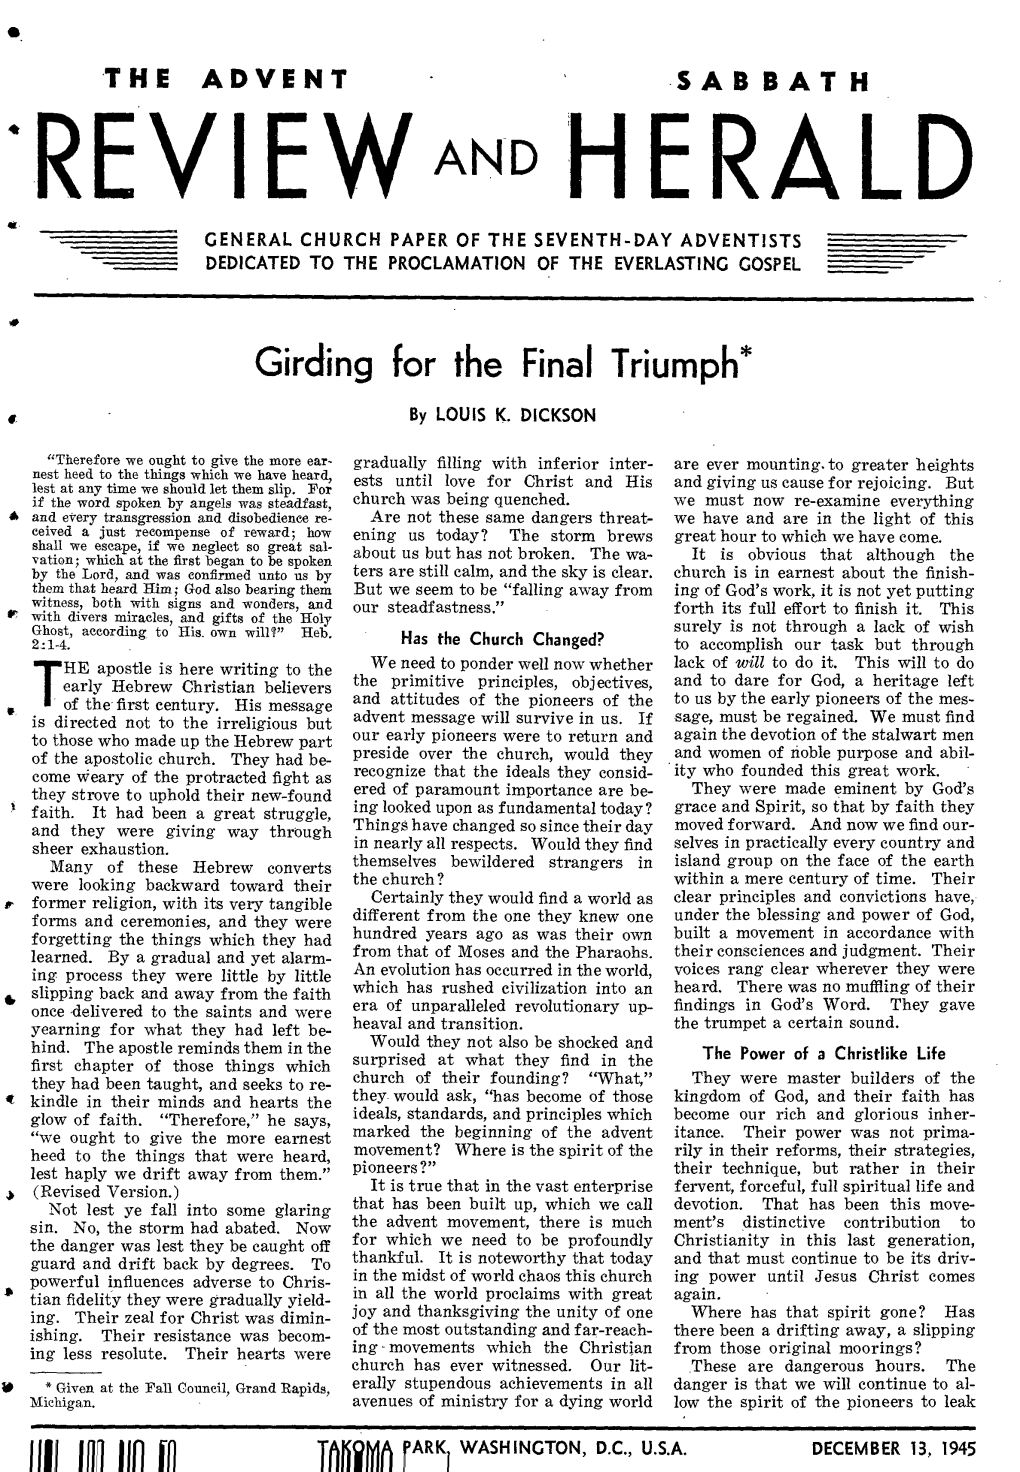 Review and Herald for 1945